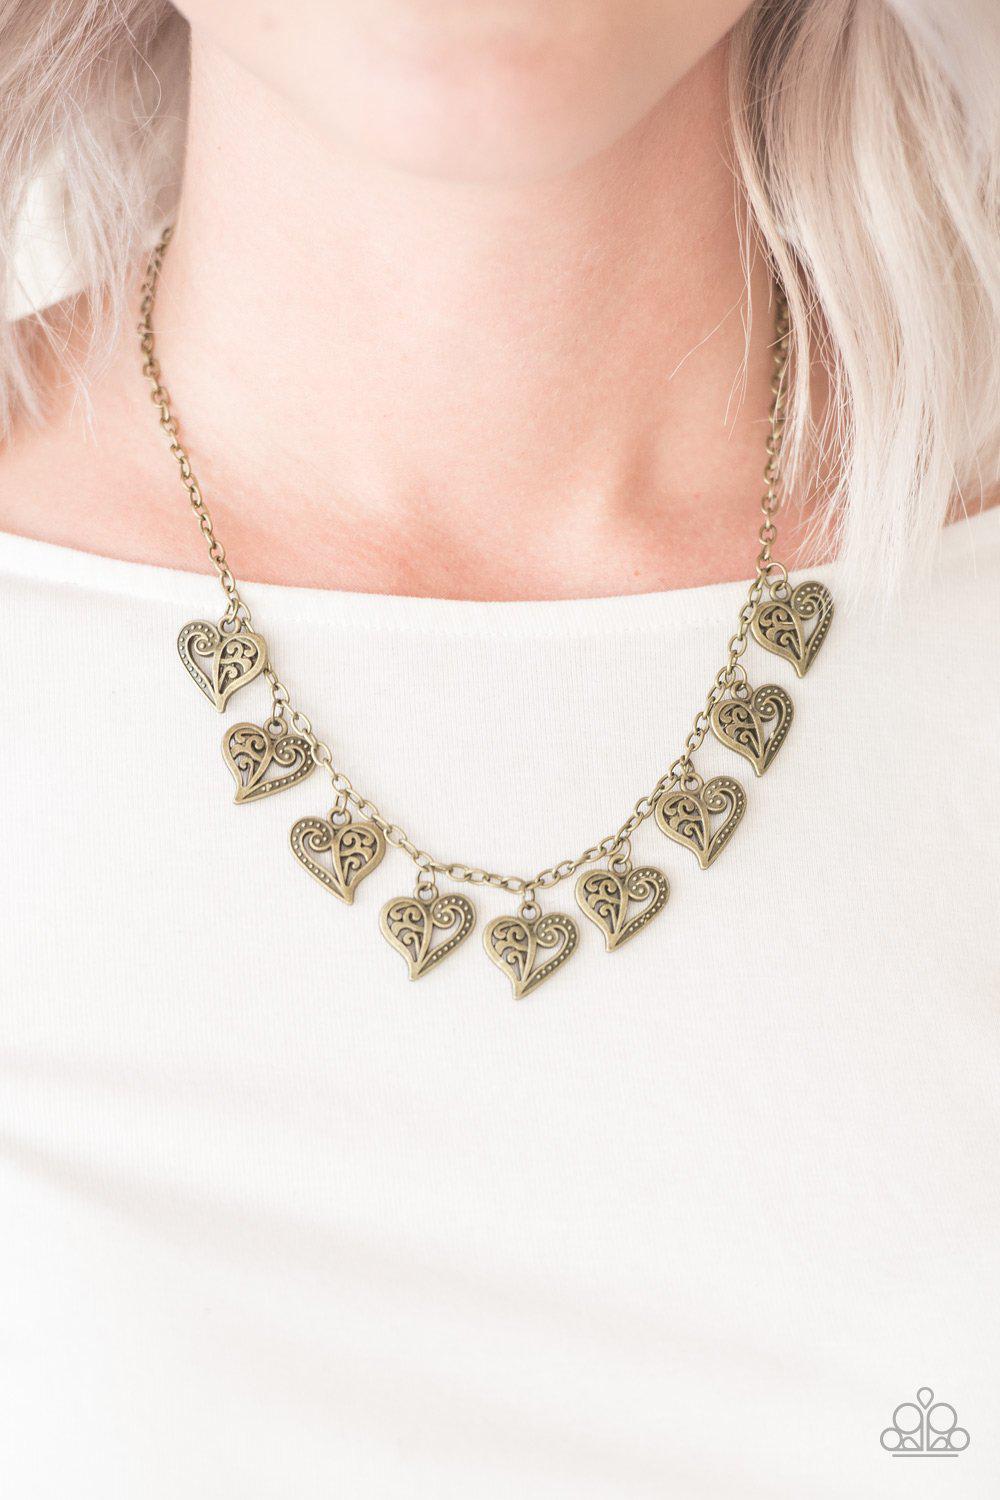 Speaking From The Heart Brass Necklace - Paparazzi Accessories-CarasShop.com - $5 Jewelry by Cara Jewels